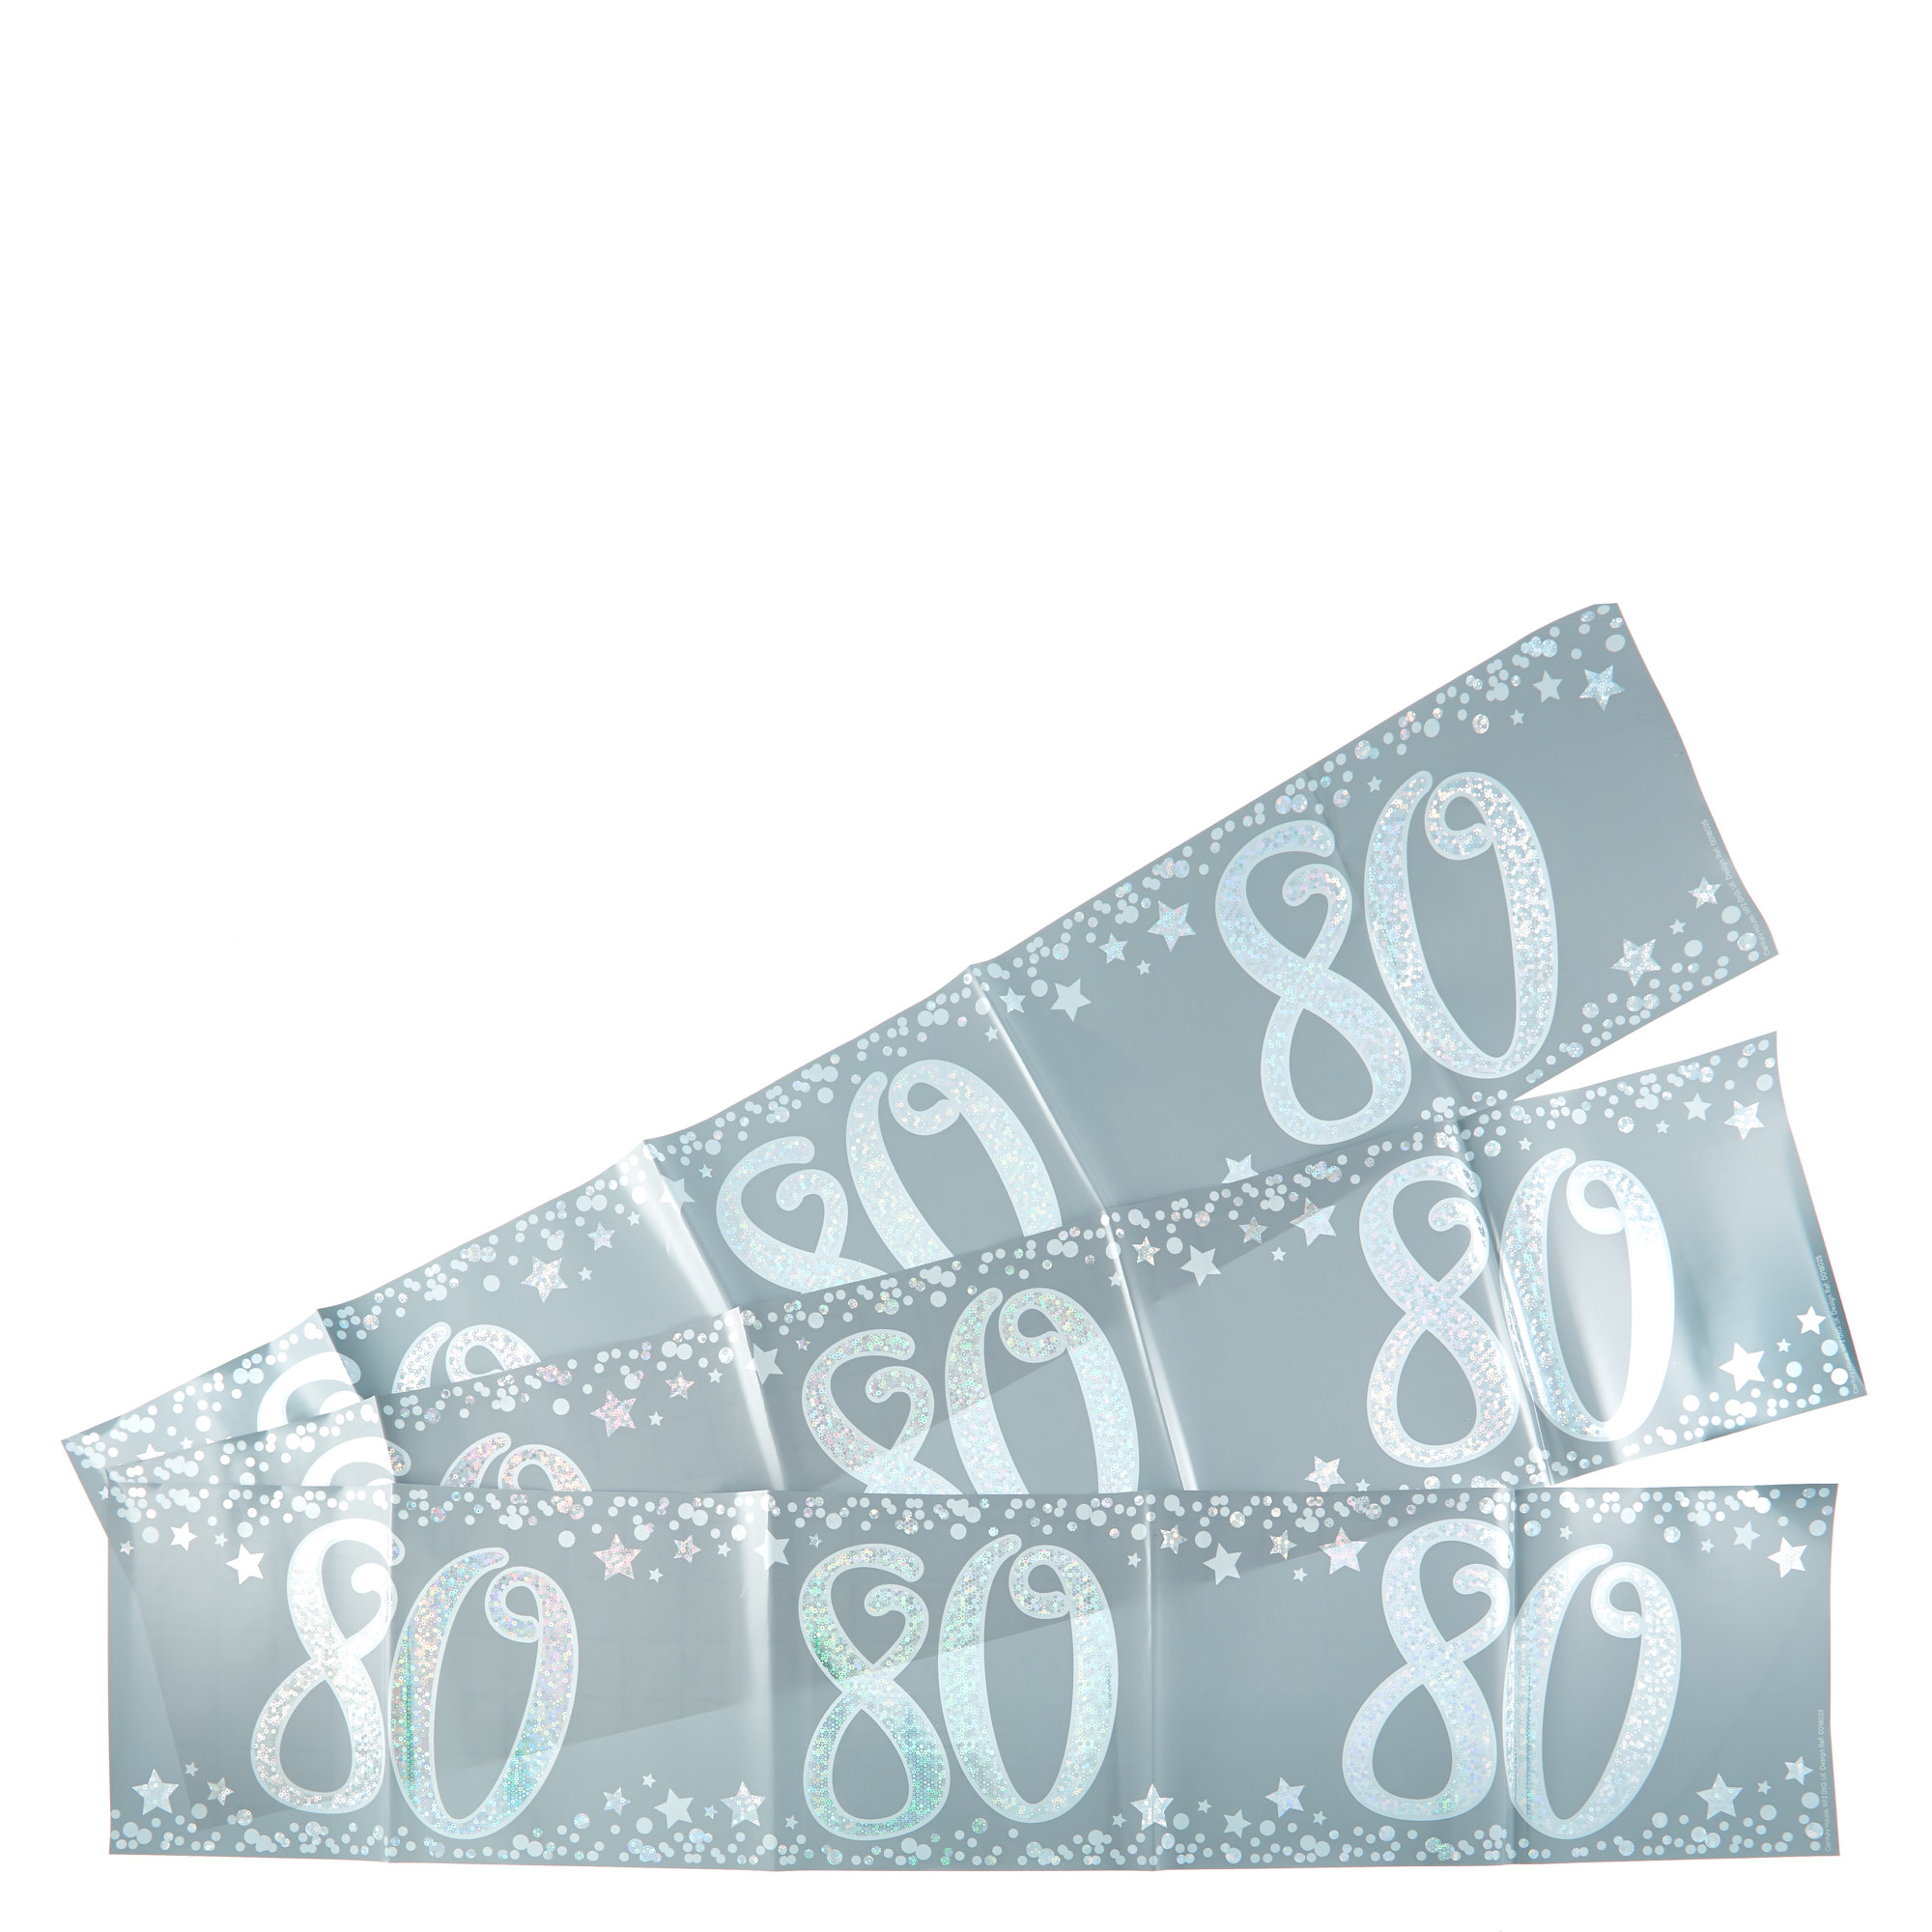 Holographic 80th Birthday Party Banners - Pack Of 3 